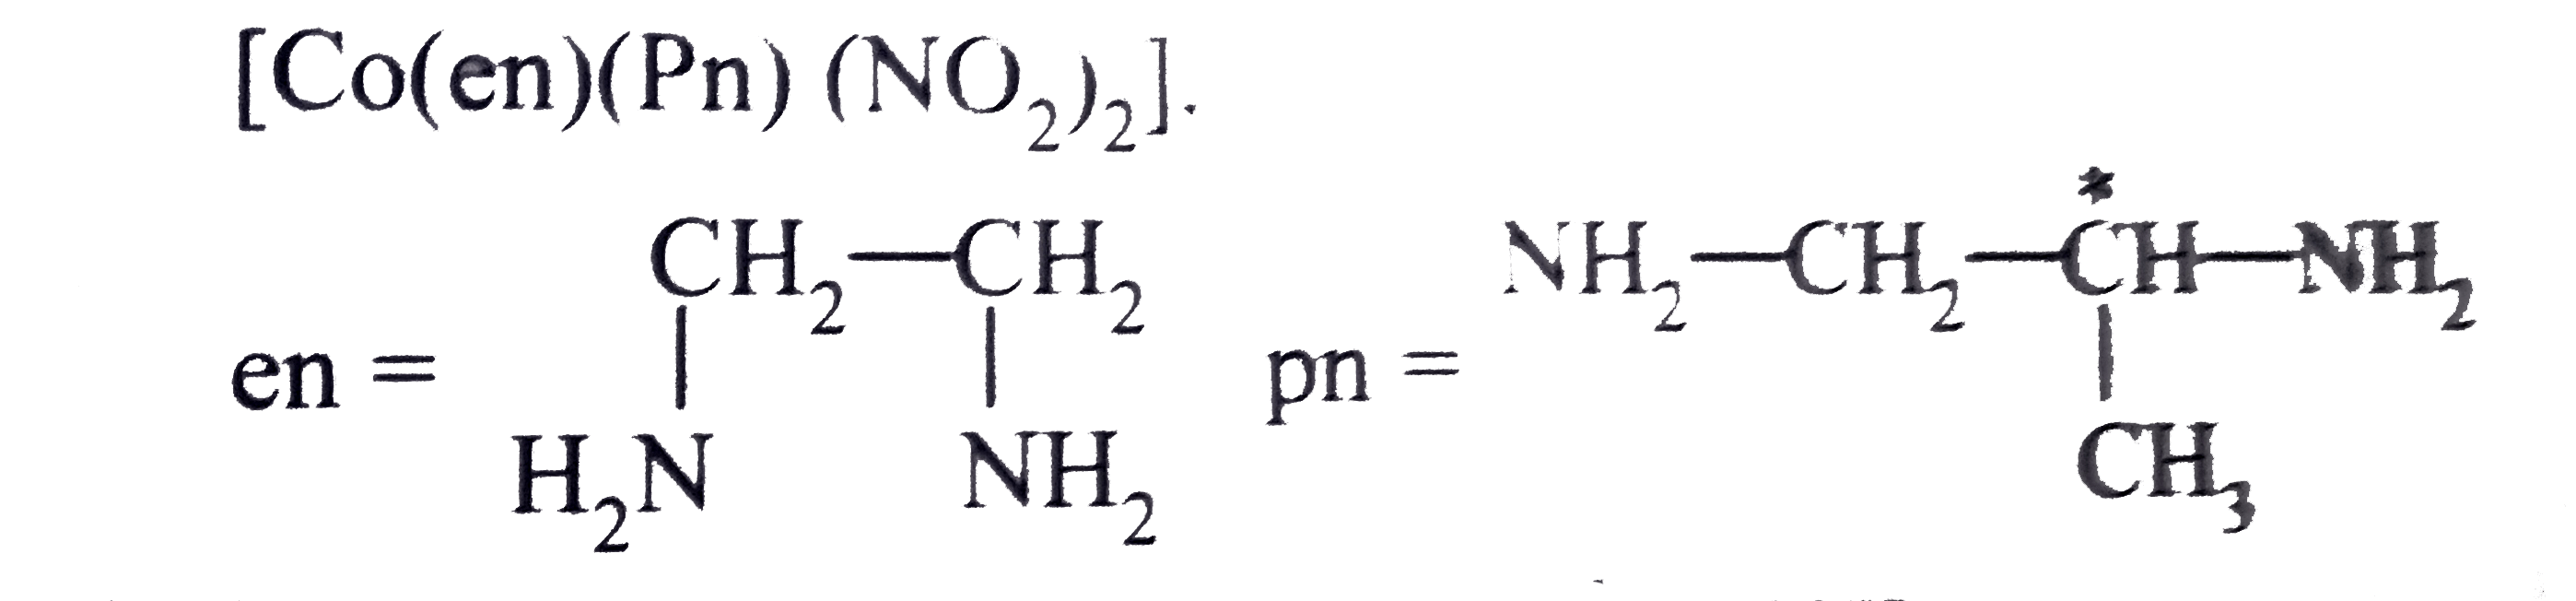 Find the number of geometrical isomers in [Co(en)(Pn)(NO(2))(2)]    .